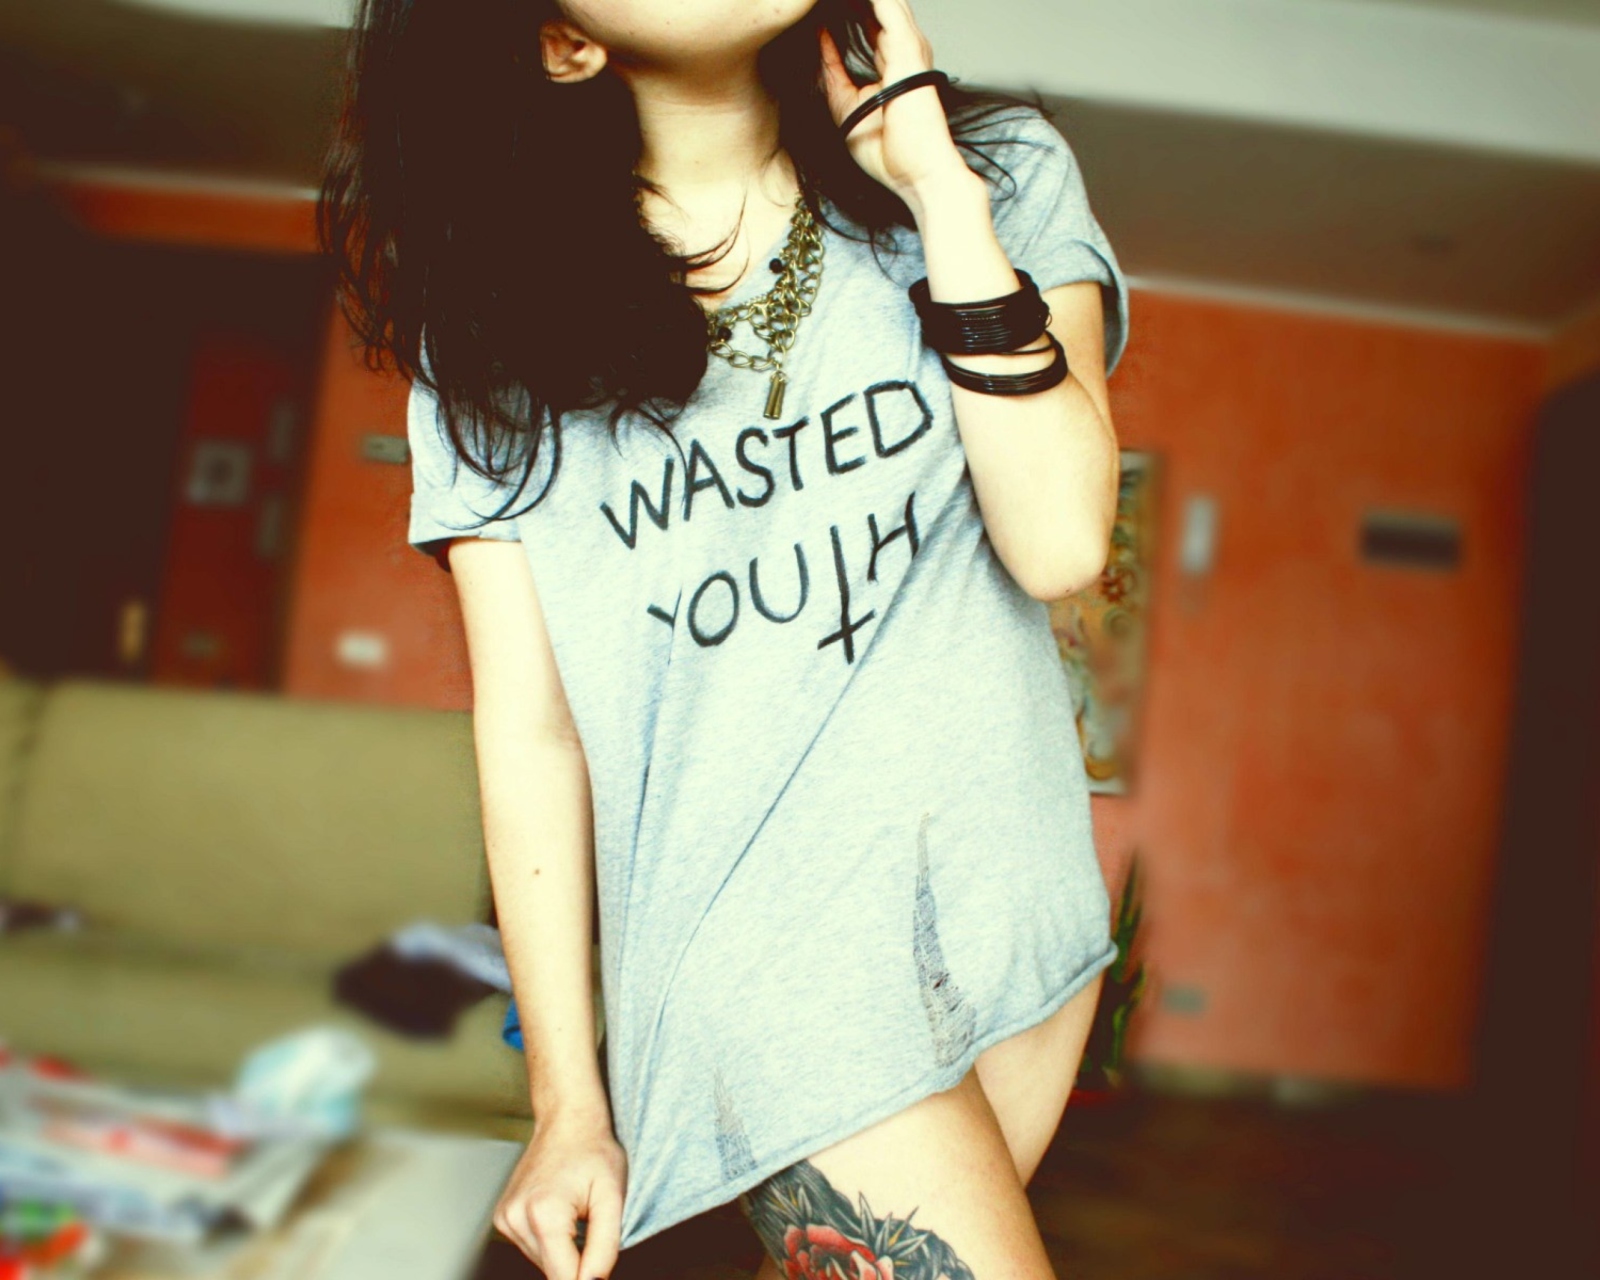 Das Wasted Youth T-Shirt Wallpaper 1600x1280